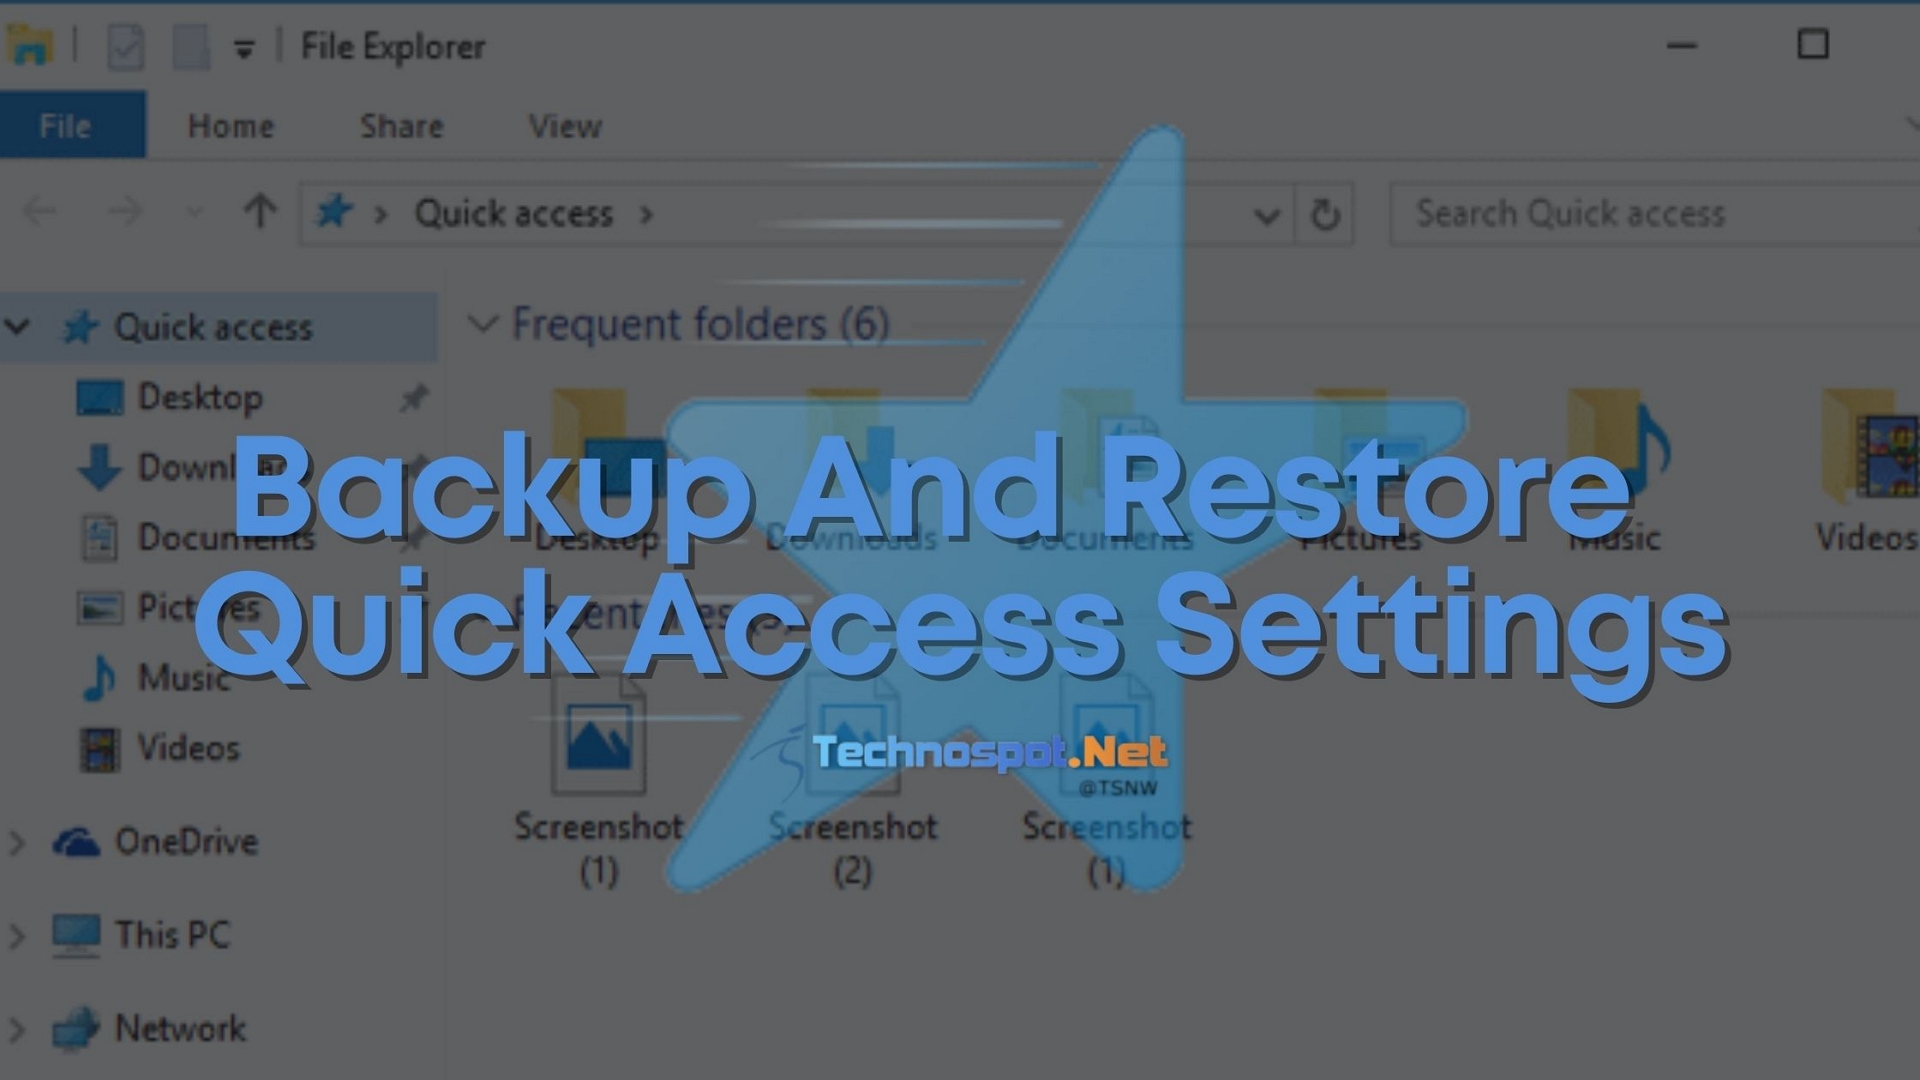 Backup And Restore Quick Access Settings